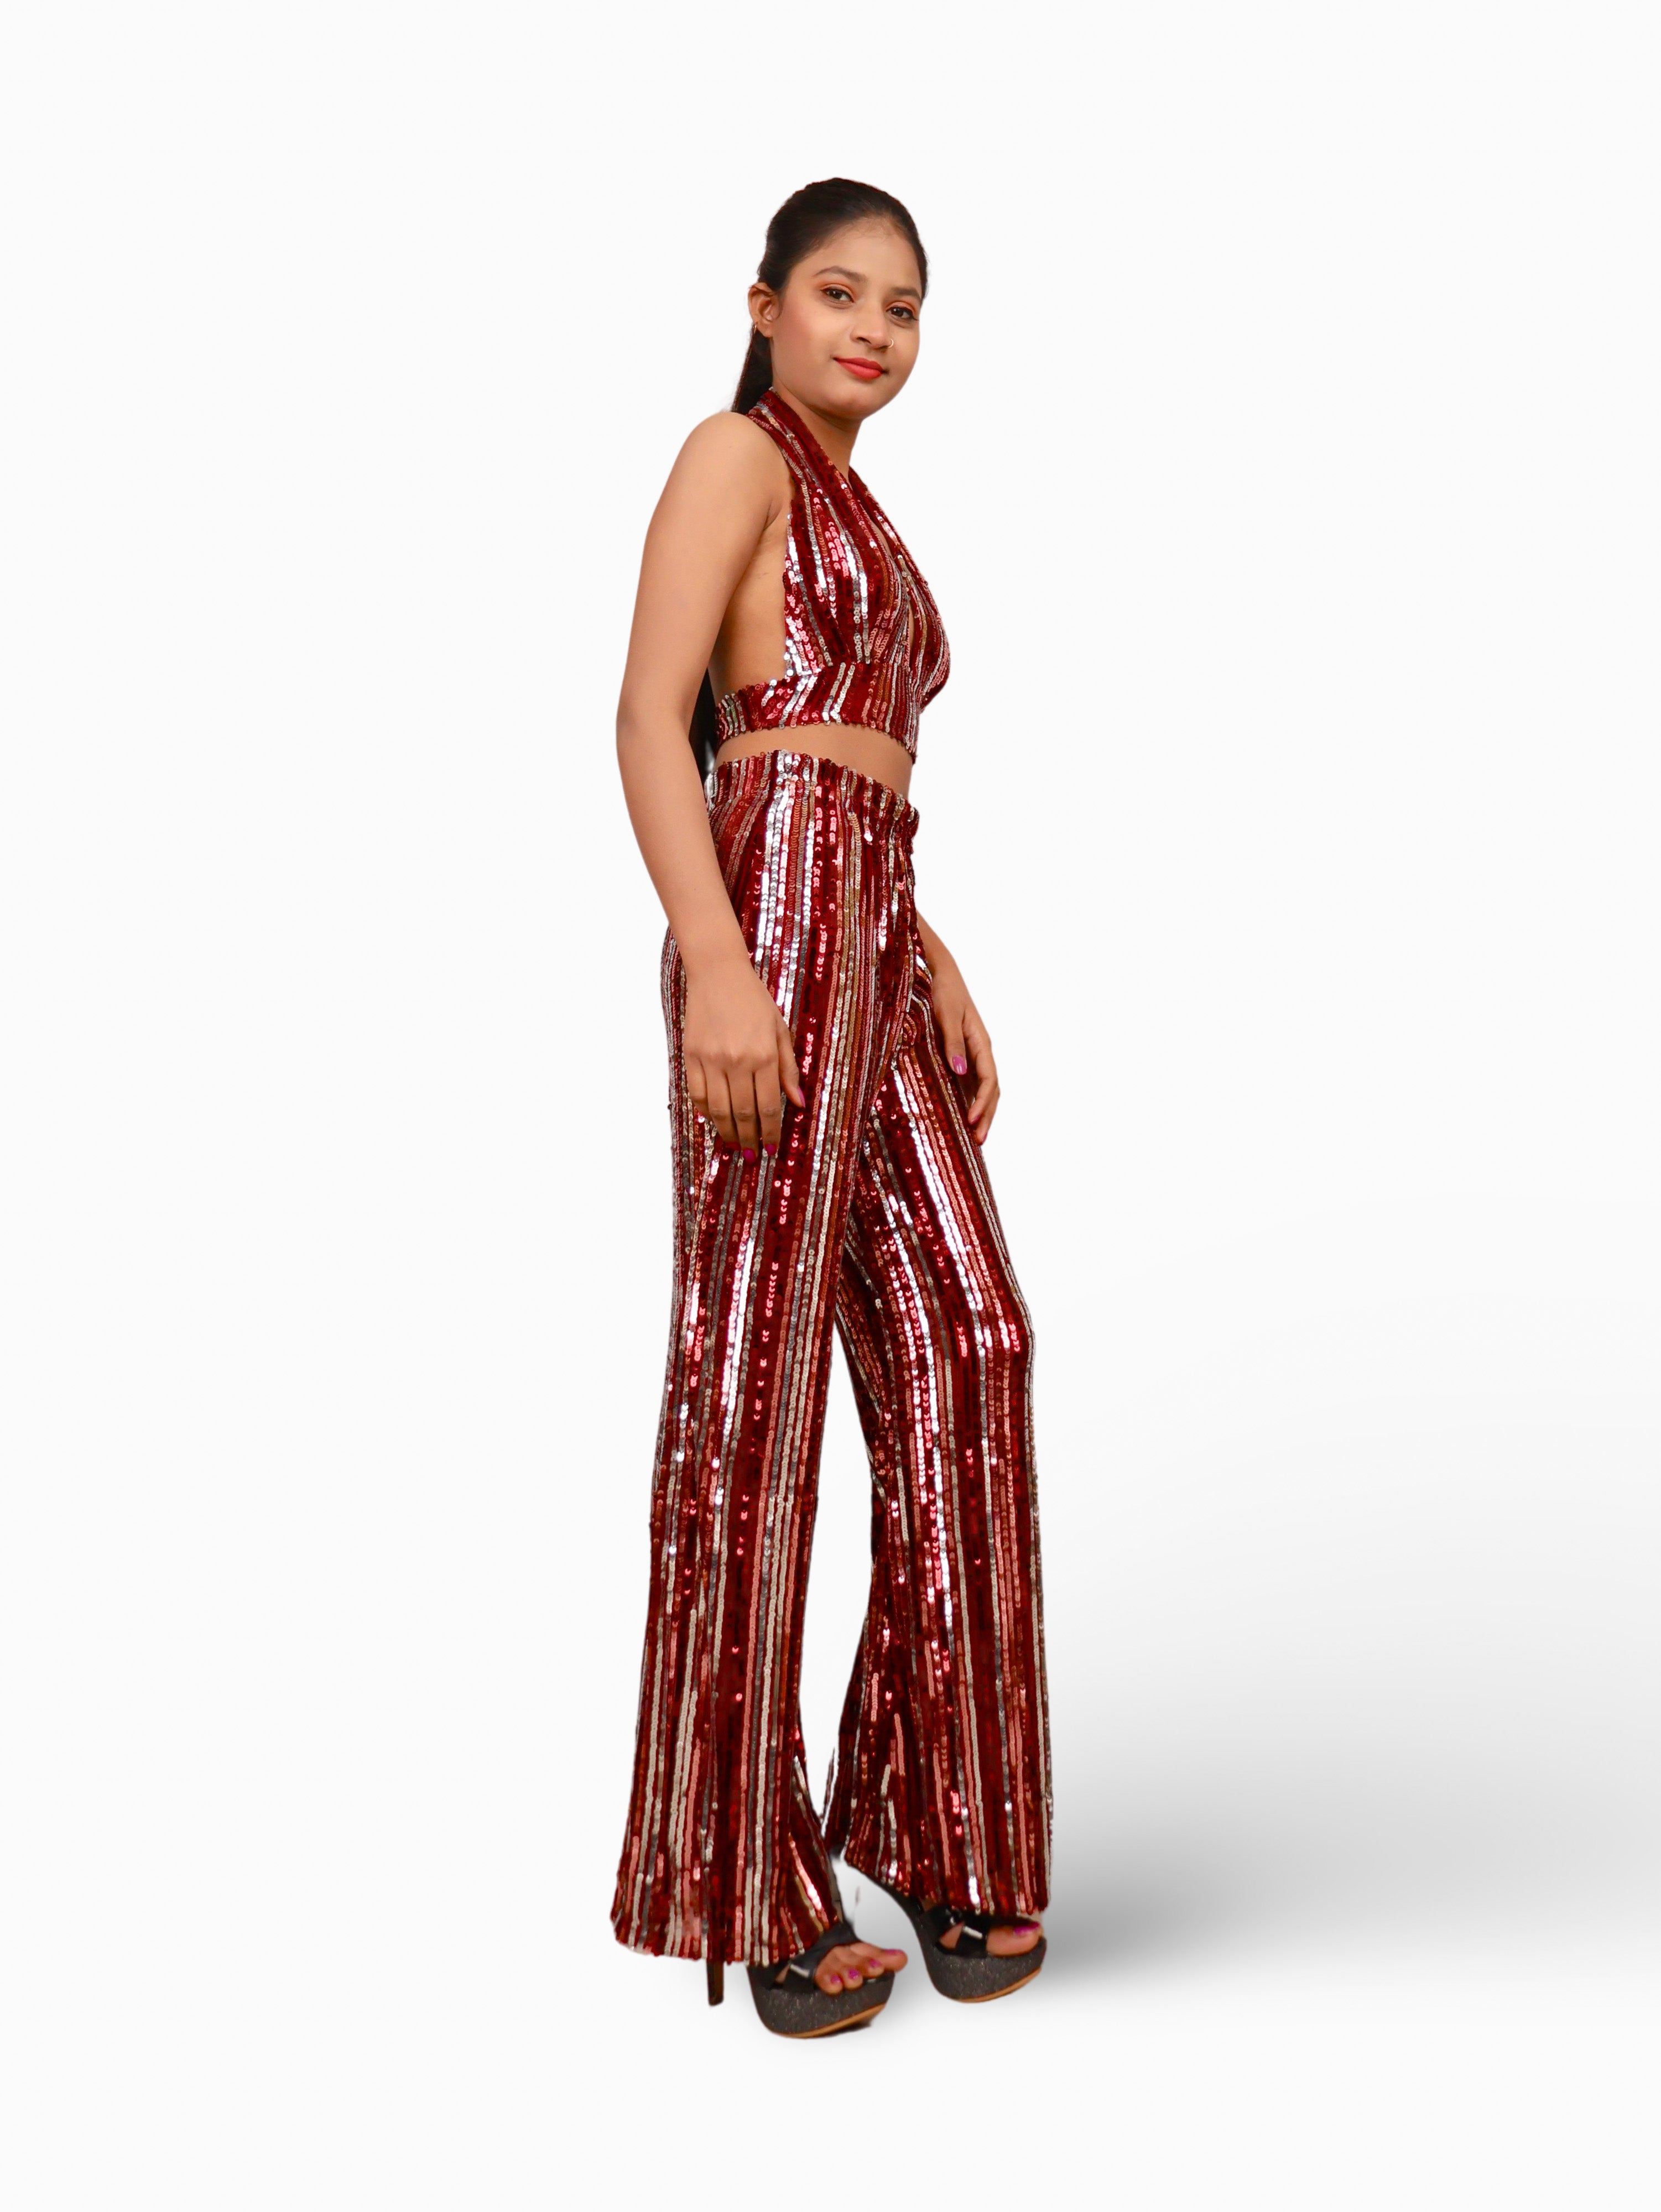 Glamour Halter Neck Sequins Bodycon Co-Ord Set by Shreekama Maroon Dress for Party Festival Wedding Occasion in Noida